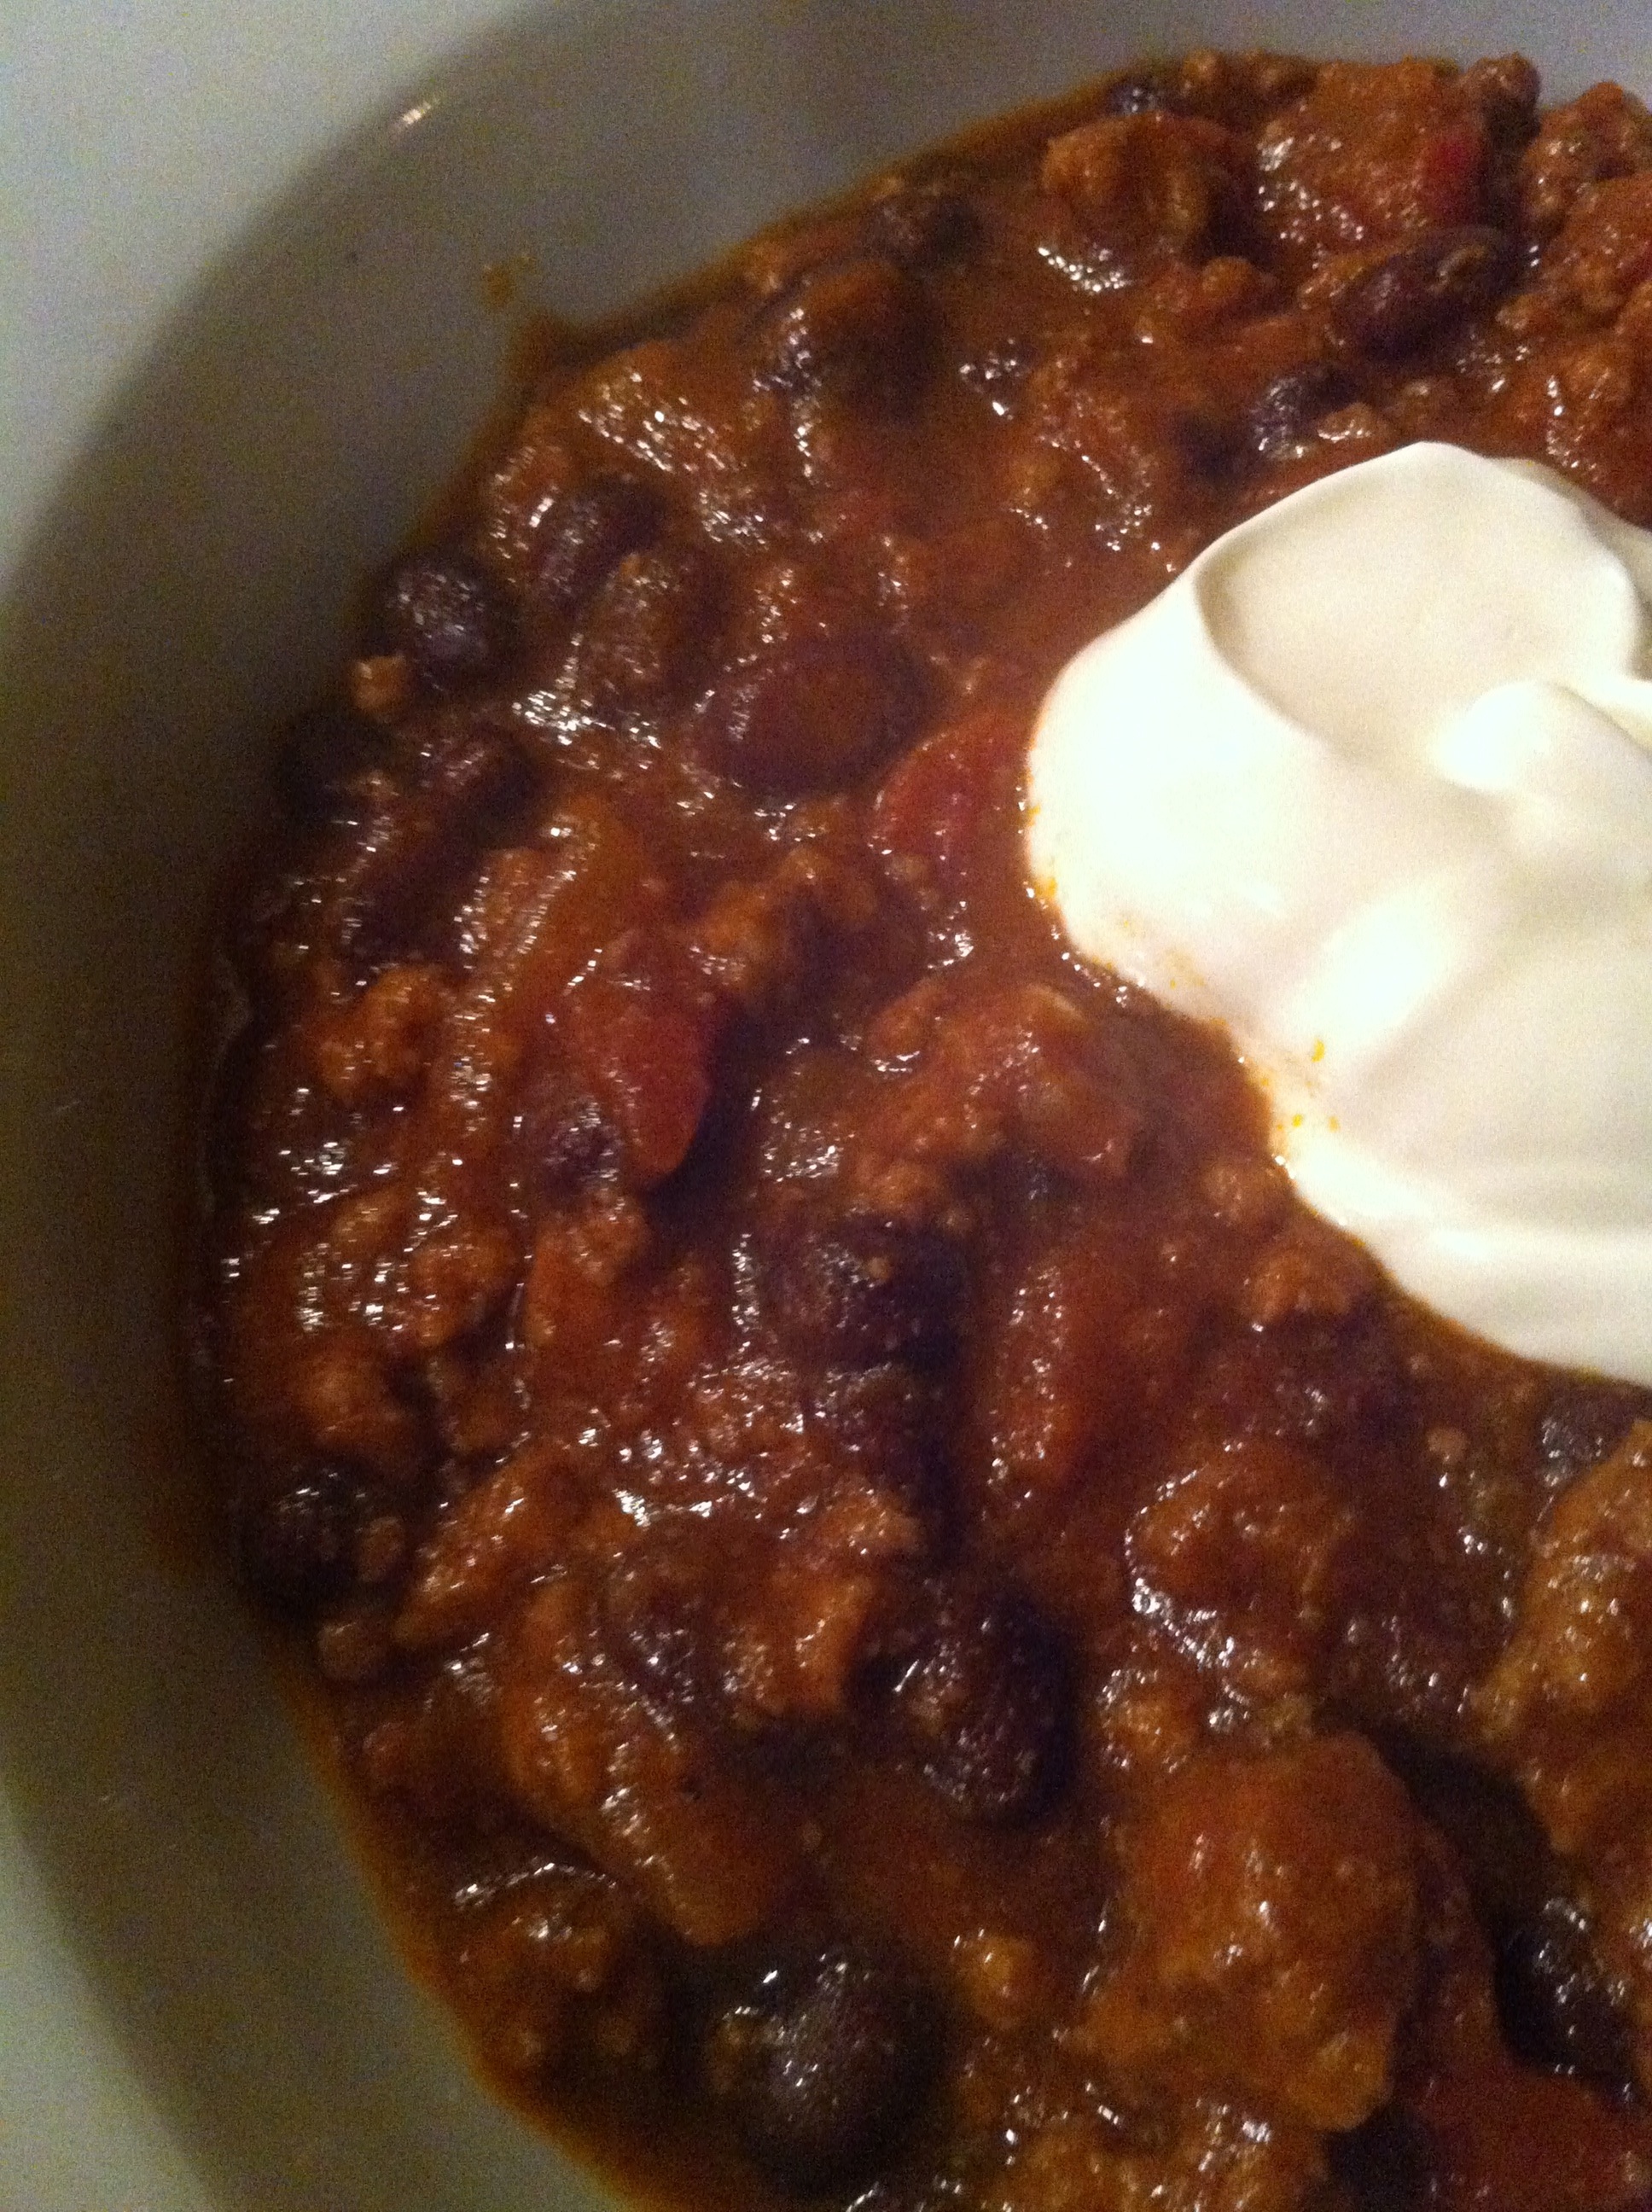 Black Bean Chili with a dollop of Sour Cream! (Photo Credit: Adroit Ideals)